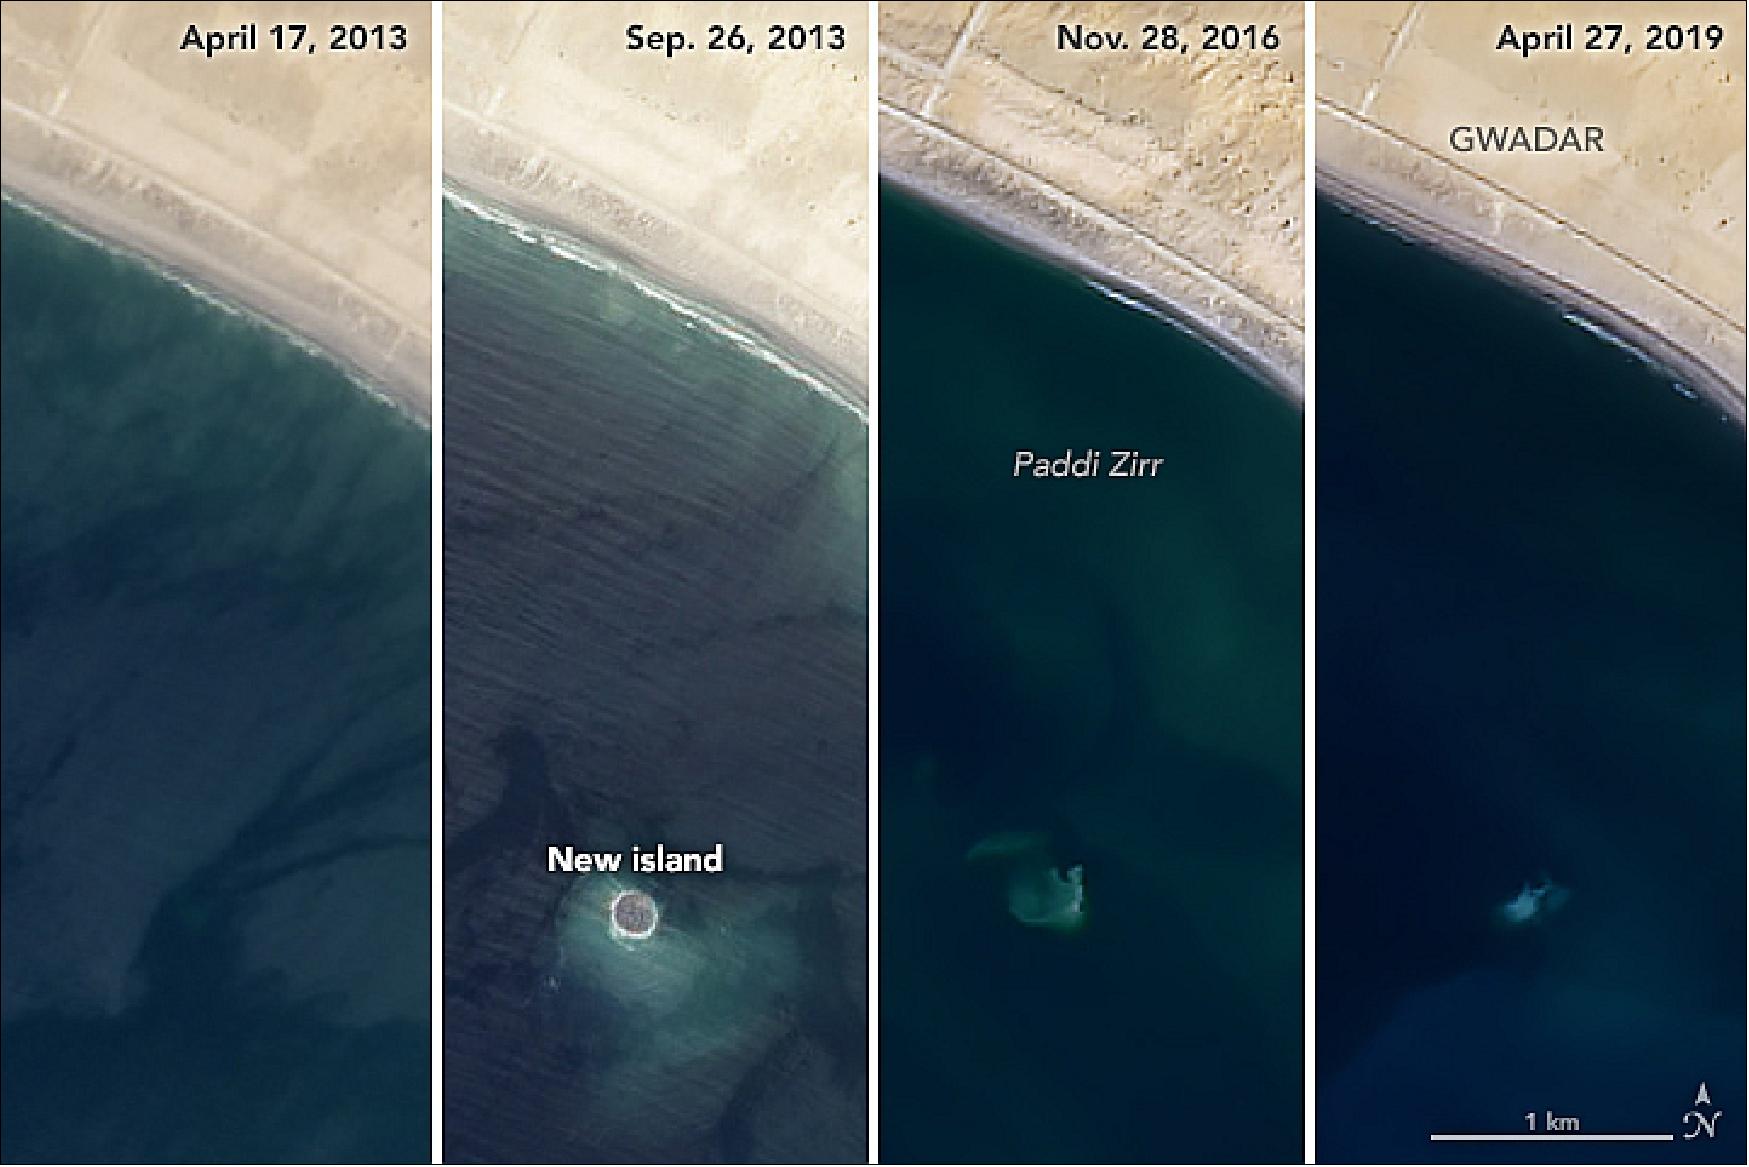 Figure 66: Zalzala Koh may be out of sight for now, but that does not mean it is completely gone. In 2019, hints of the island persist in Landsat imagery. As recently as June 2019, Landsat observed trails of sediment circulating around the submerged base. The series of images above shows the island in April and September 2013, November 2016, and April 2019. The Advanced Land Imager (ALI) on EO-1 acquired the September 2013 image; all the others images came from the Operational Land Imager (OLI) on Landsat 8 (image credit: NASA Earth Observatory, images by Joshua Stevens, Robert Simmon, and Jesse Allen, using Landsat data from the U.S. Geological Survey and EO-1 ALI data from the NASA EO-1 team. Story by Adam Voiland)